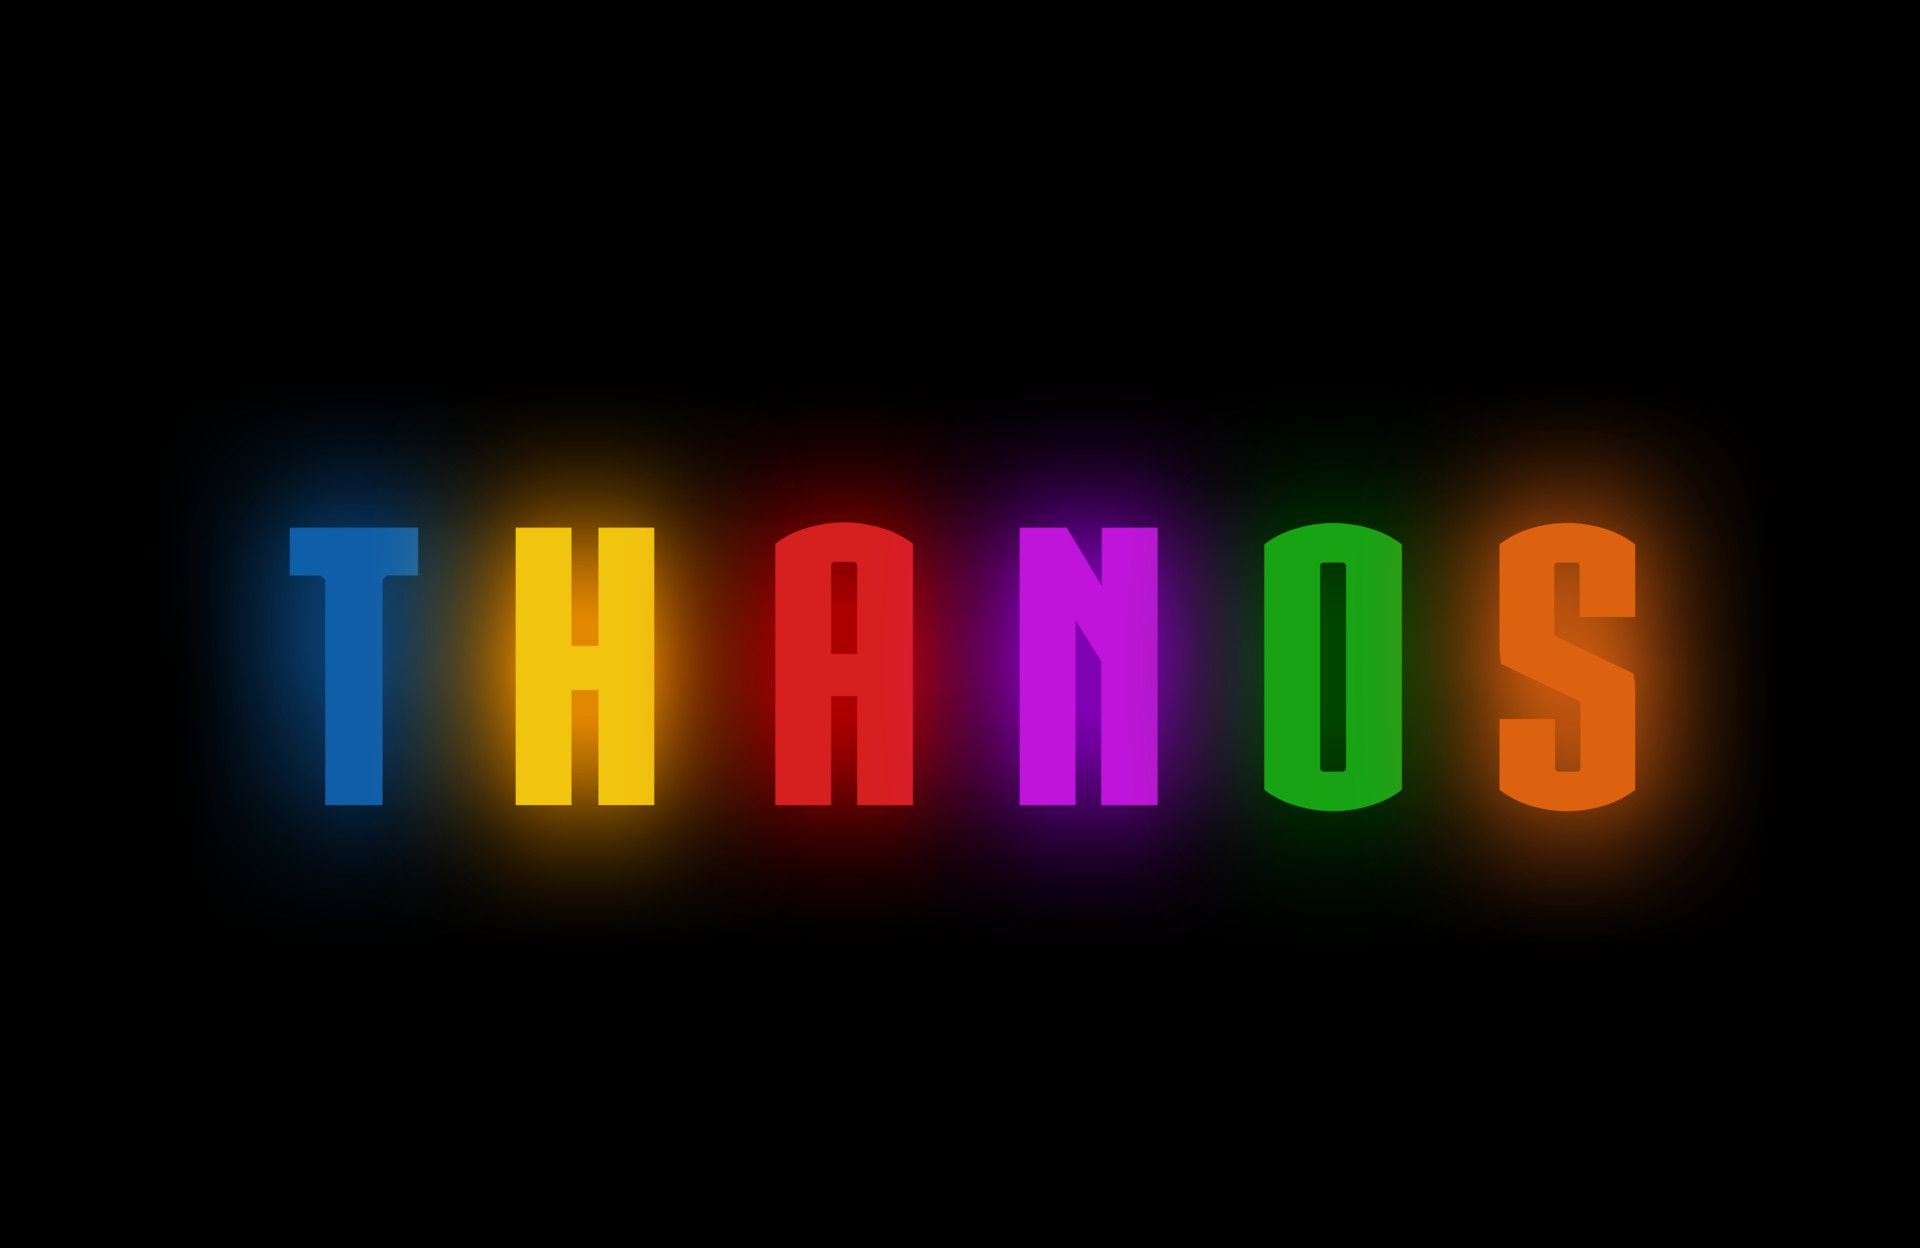 Thanos Logo Artwork, HD Superheroes, 4k Wallpaper, Image, Background, Photo and Picture